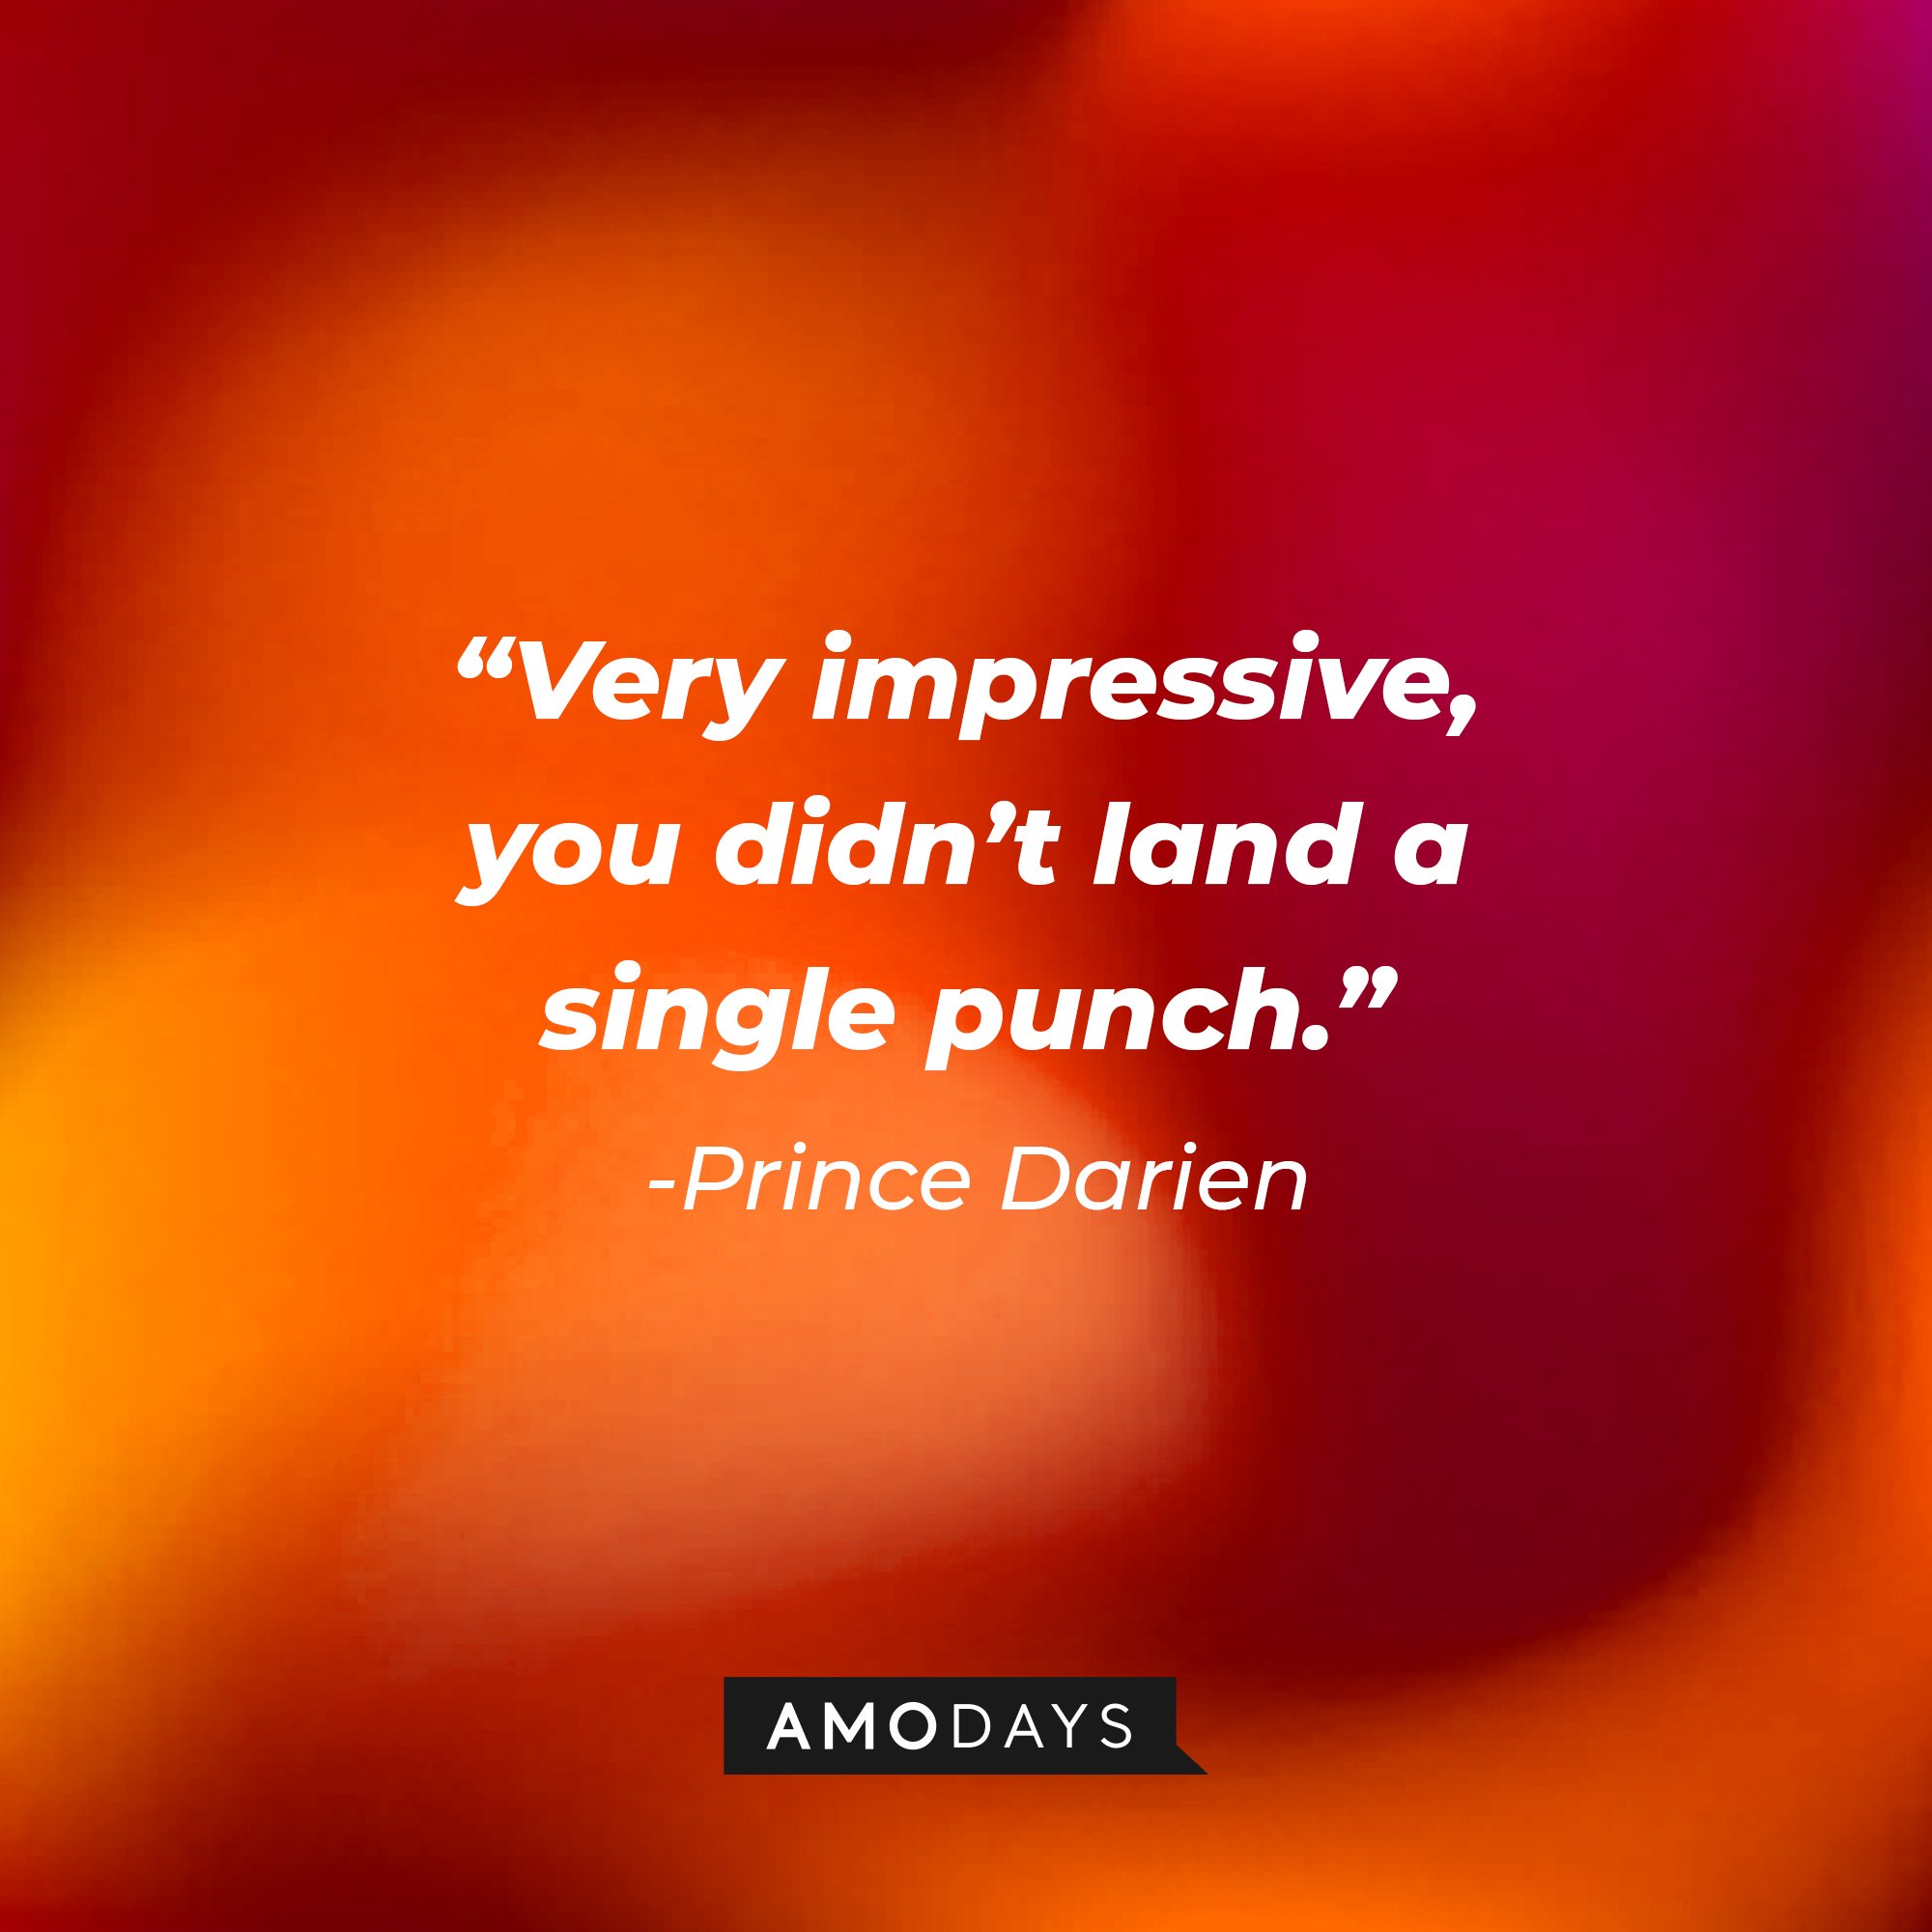  Prince Darien Shields’ quotes: "Very impressive, you didn't land a single punch." | Image: AmoDays